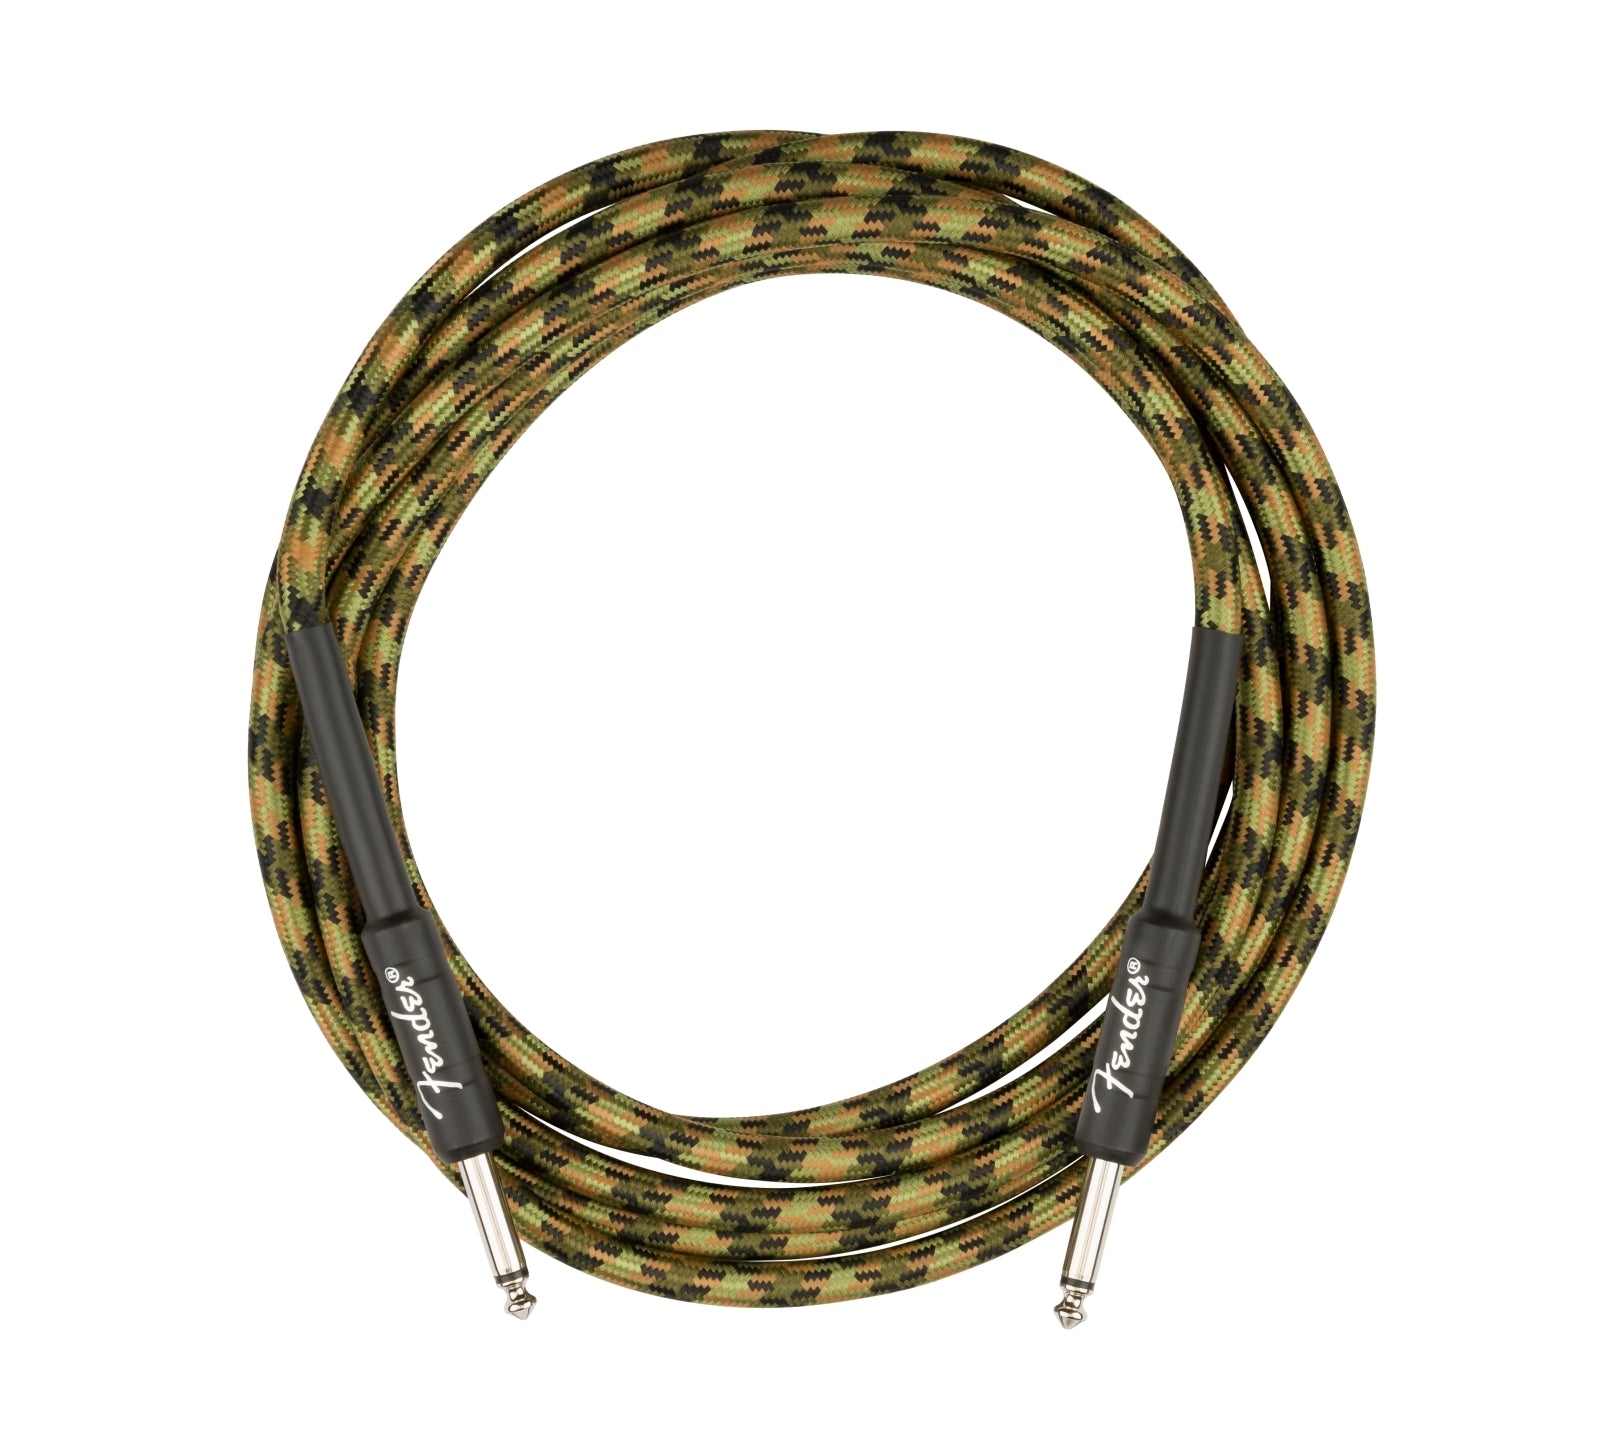 Fender Professional Series 10' Instrument Cable - Woodland Camo